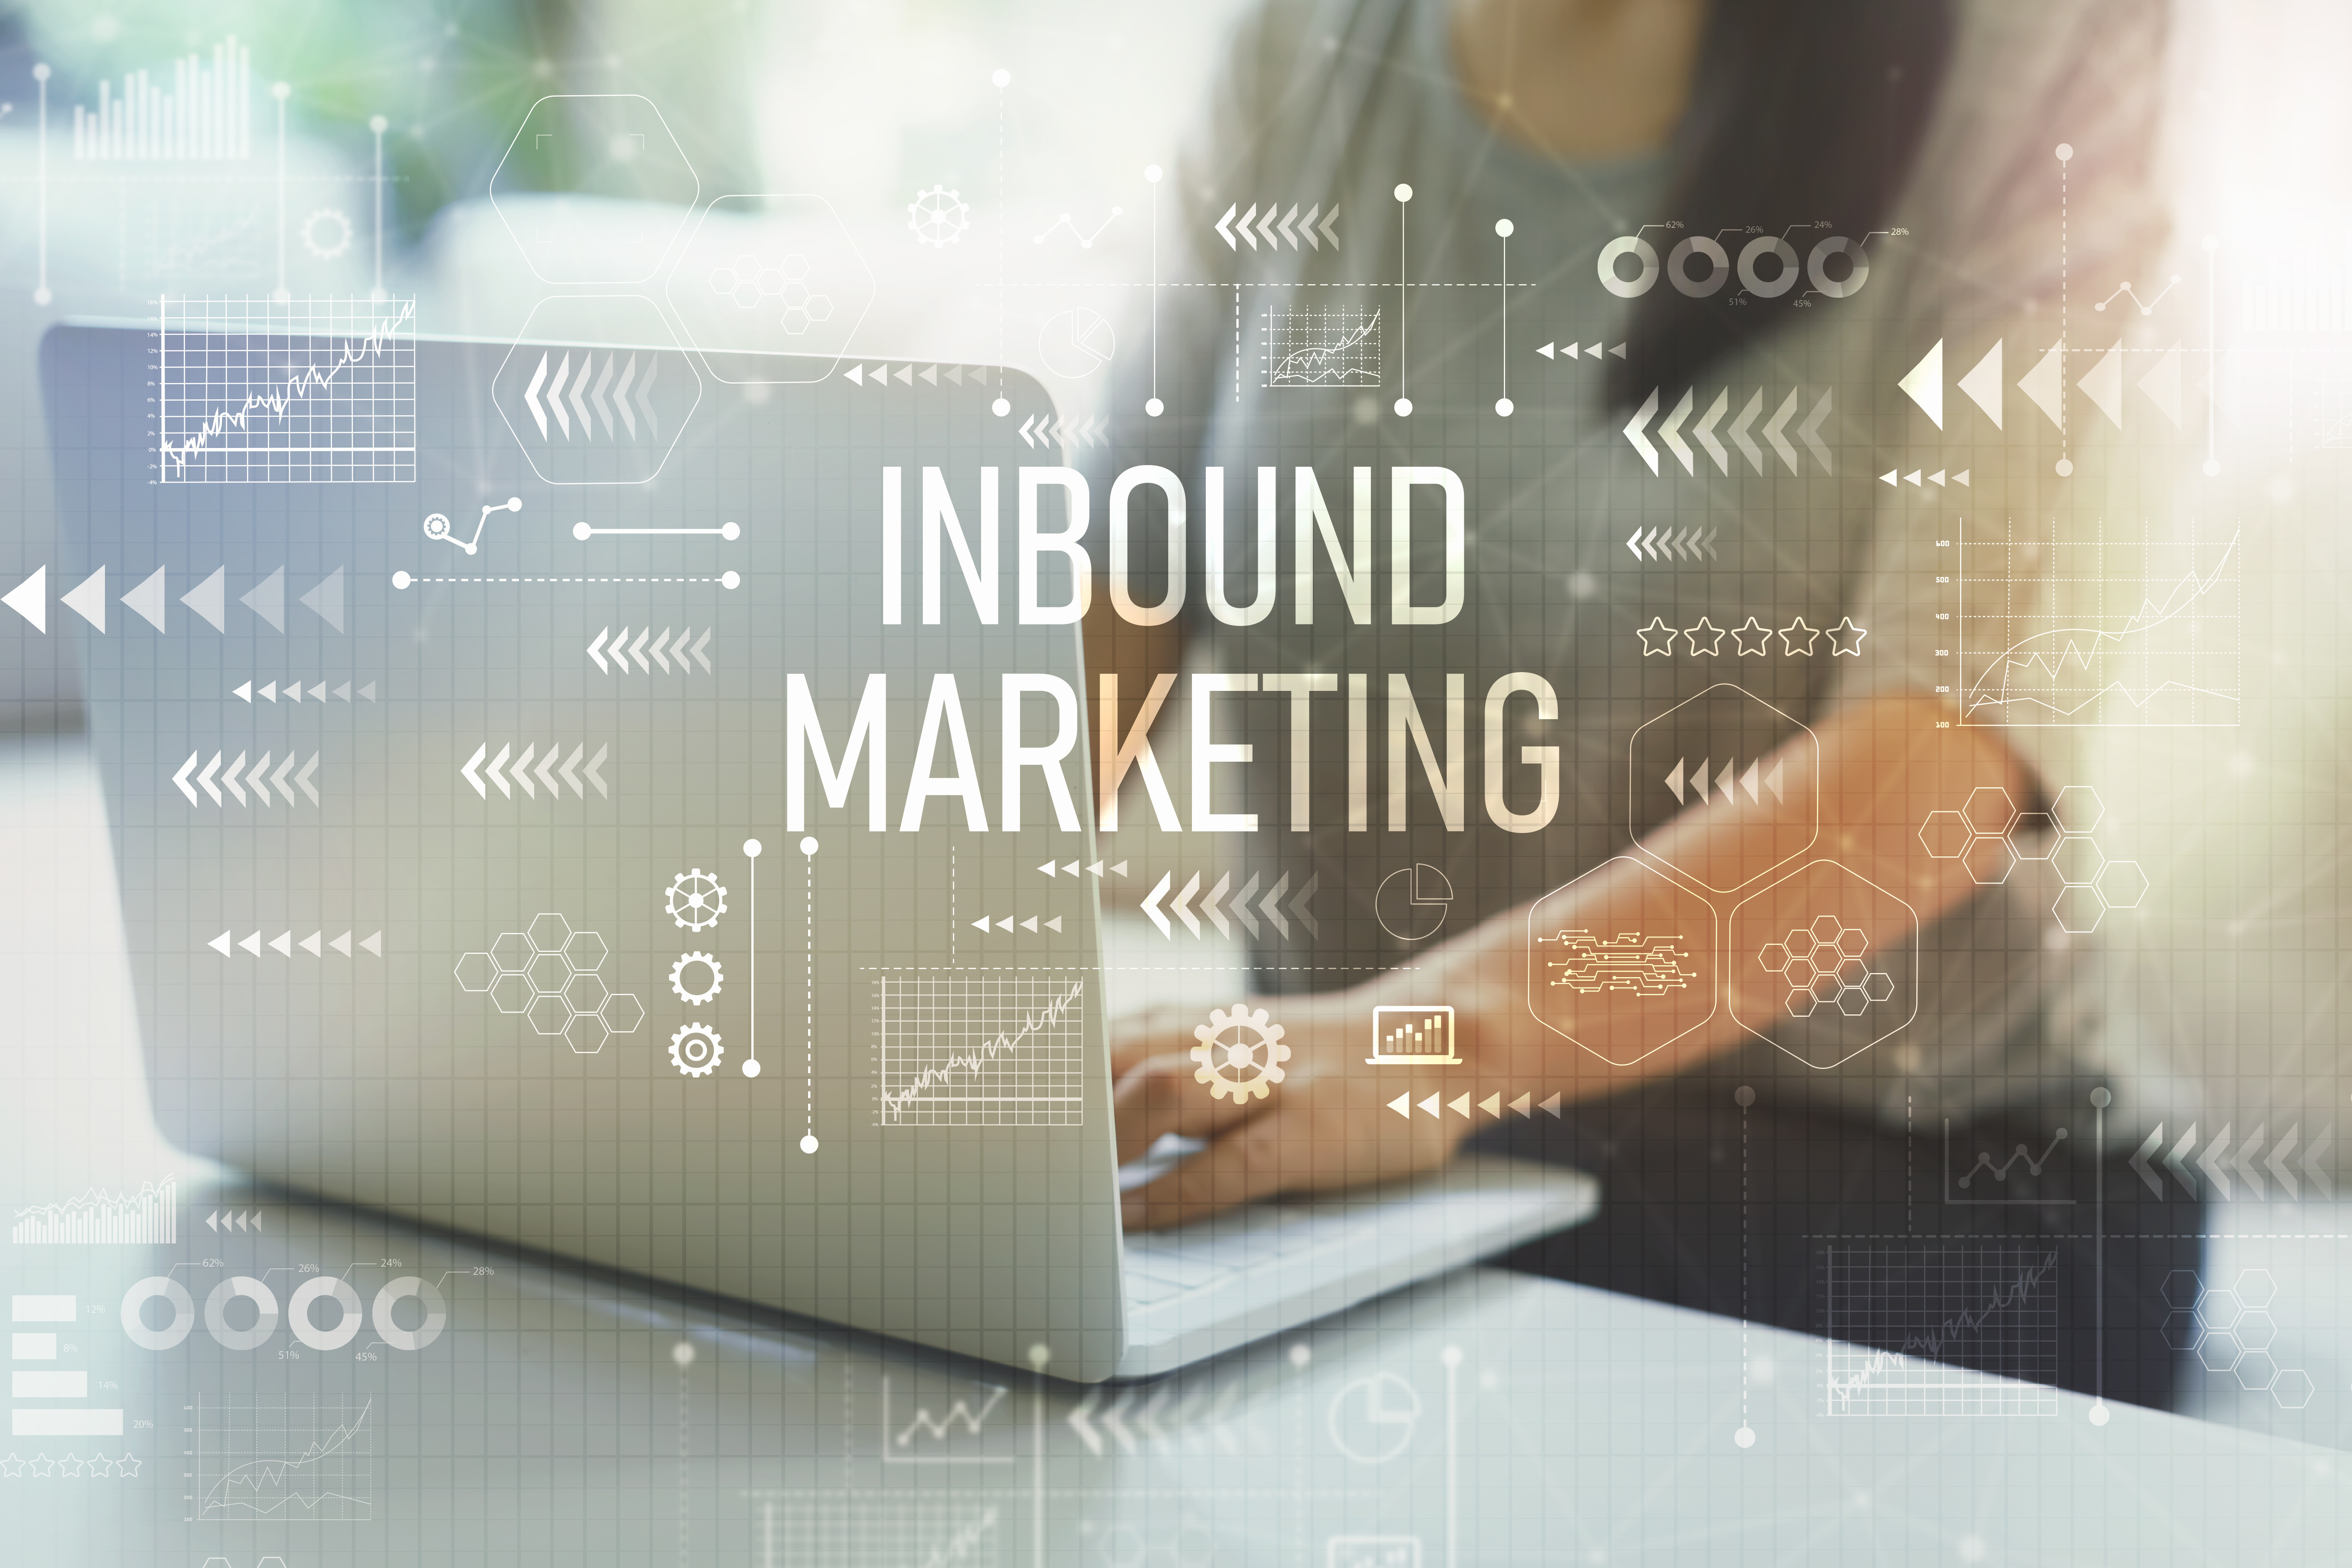 6 Reasons Why Inbound Marketing vs Traditional Marketing is Better